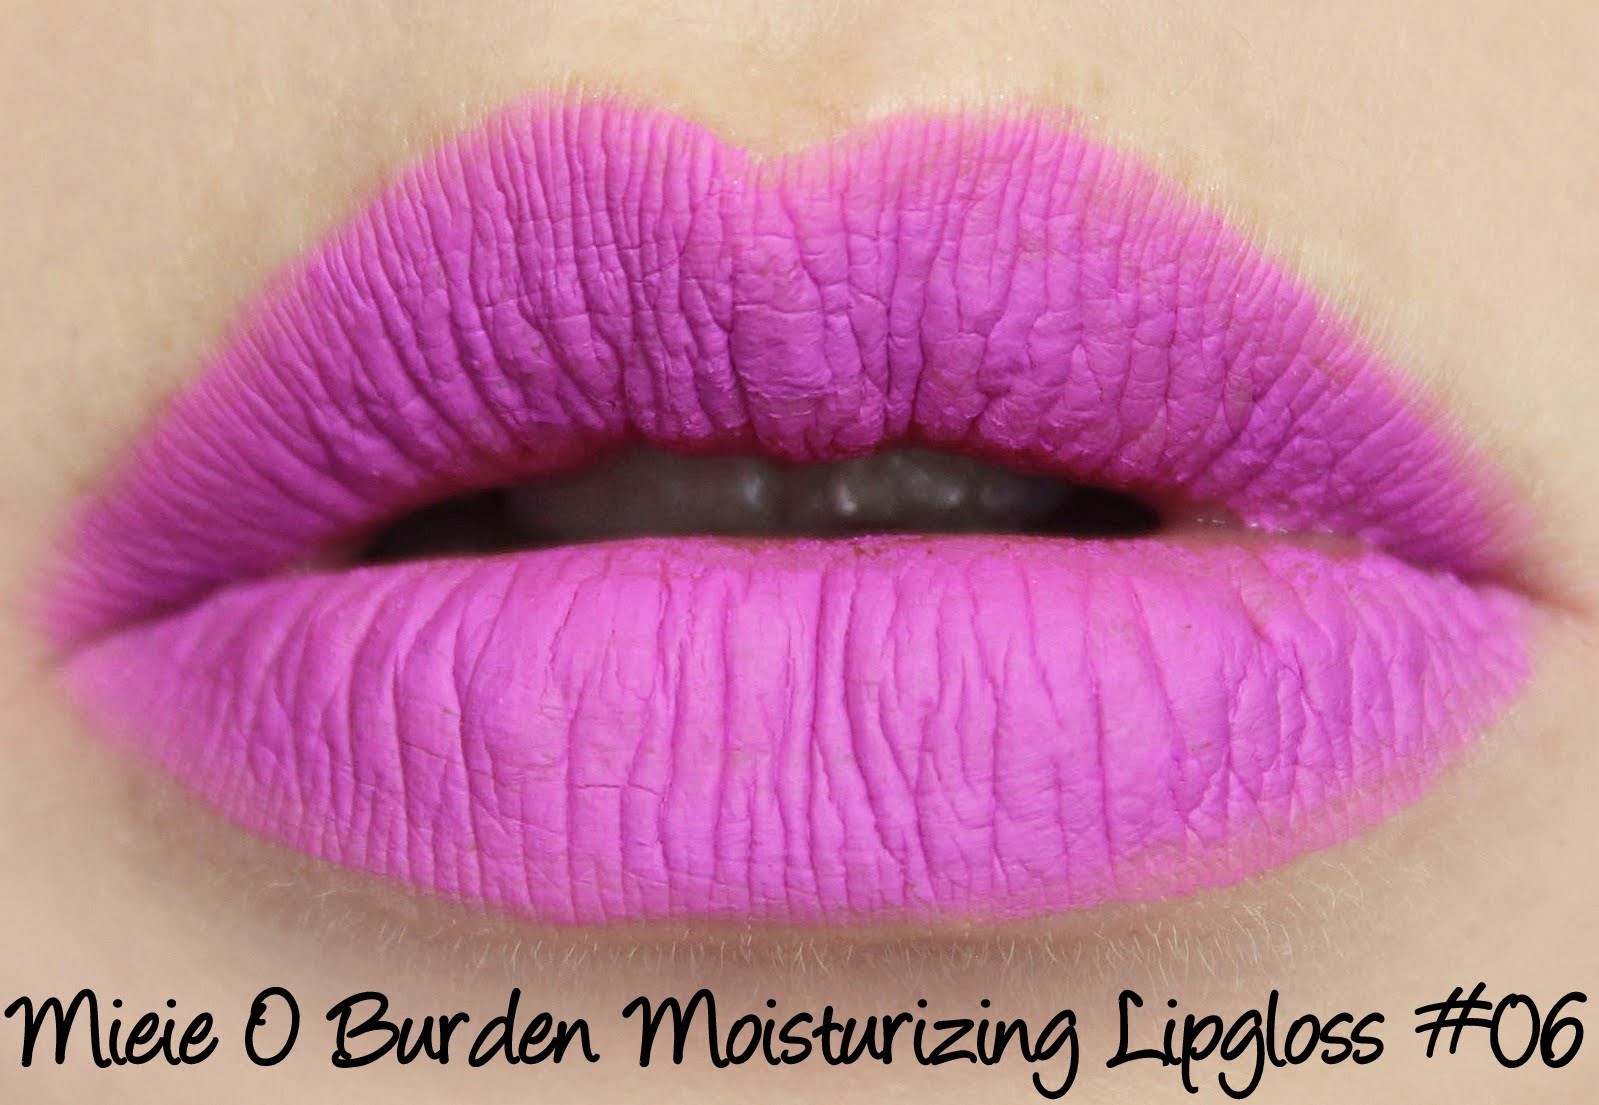 Miei O Burden Moisturizing Lipgloss #06 Swatches & Review